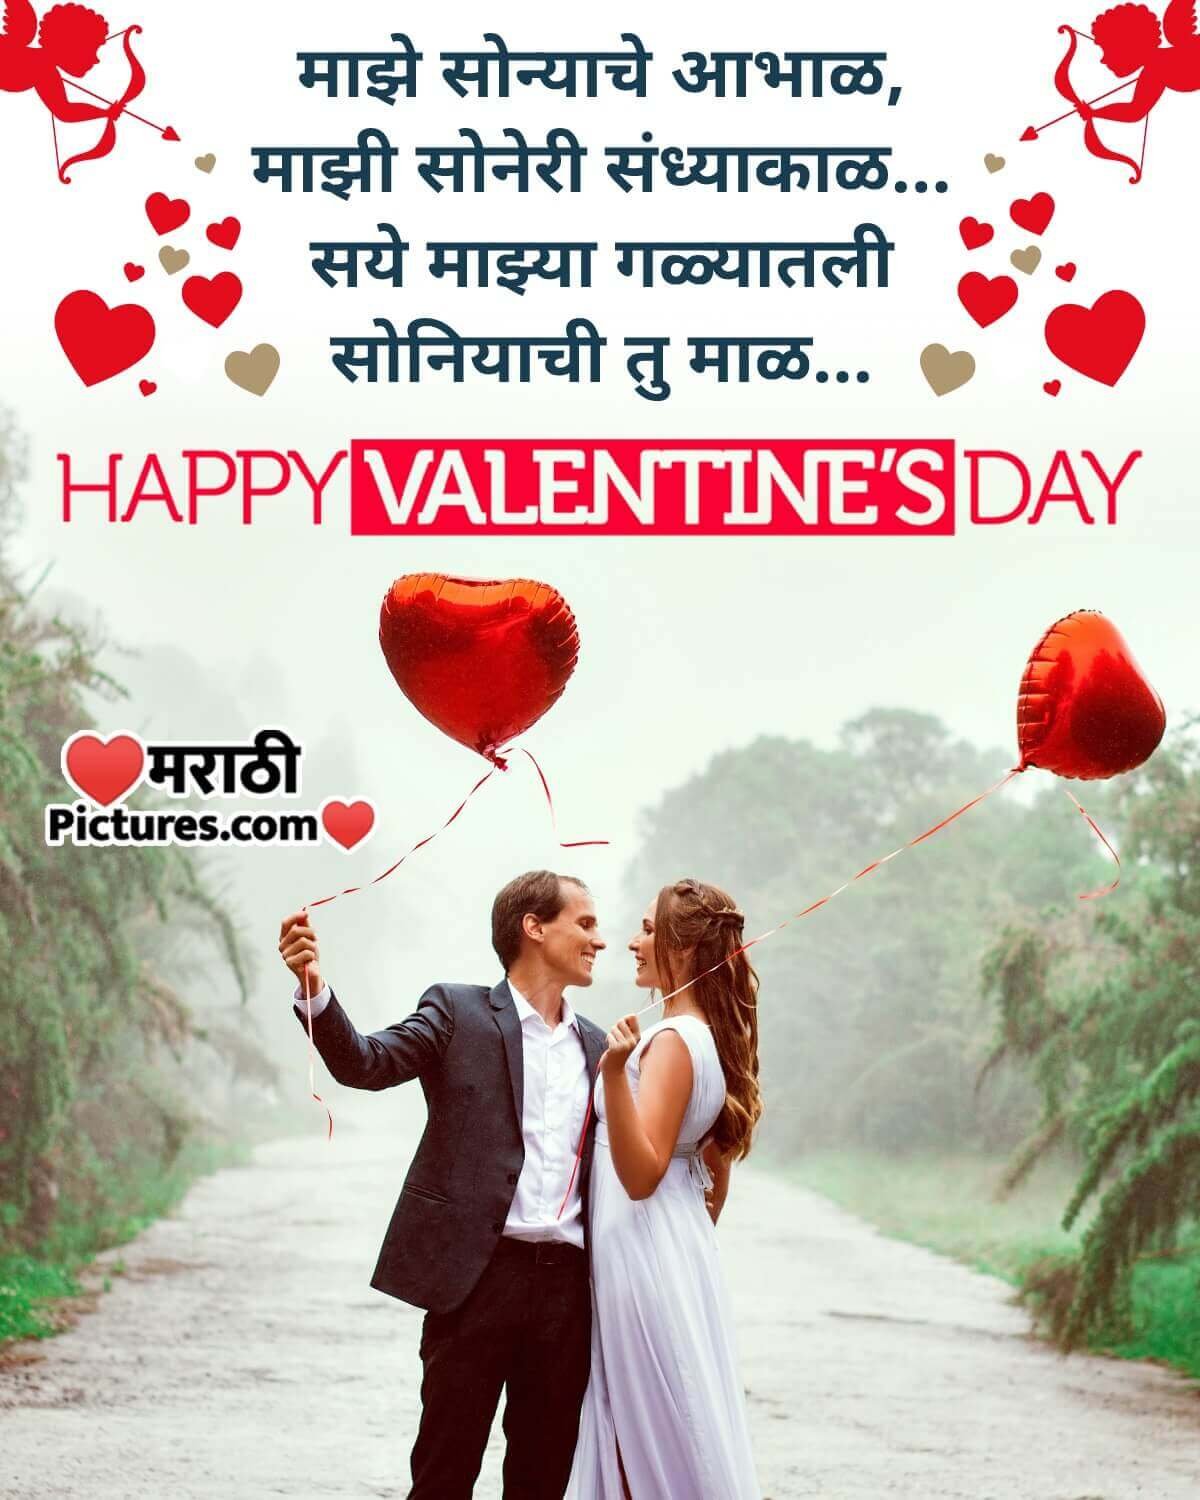 Happy Valentine’s Day Greeting Image For Gf